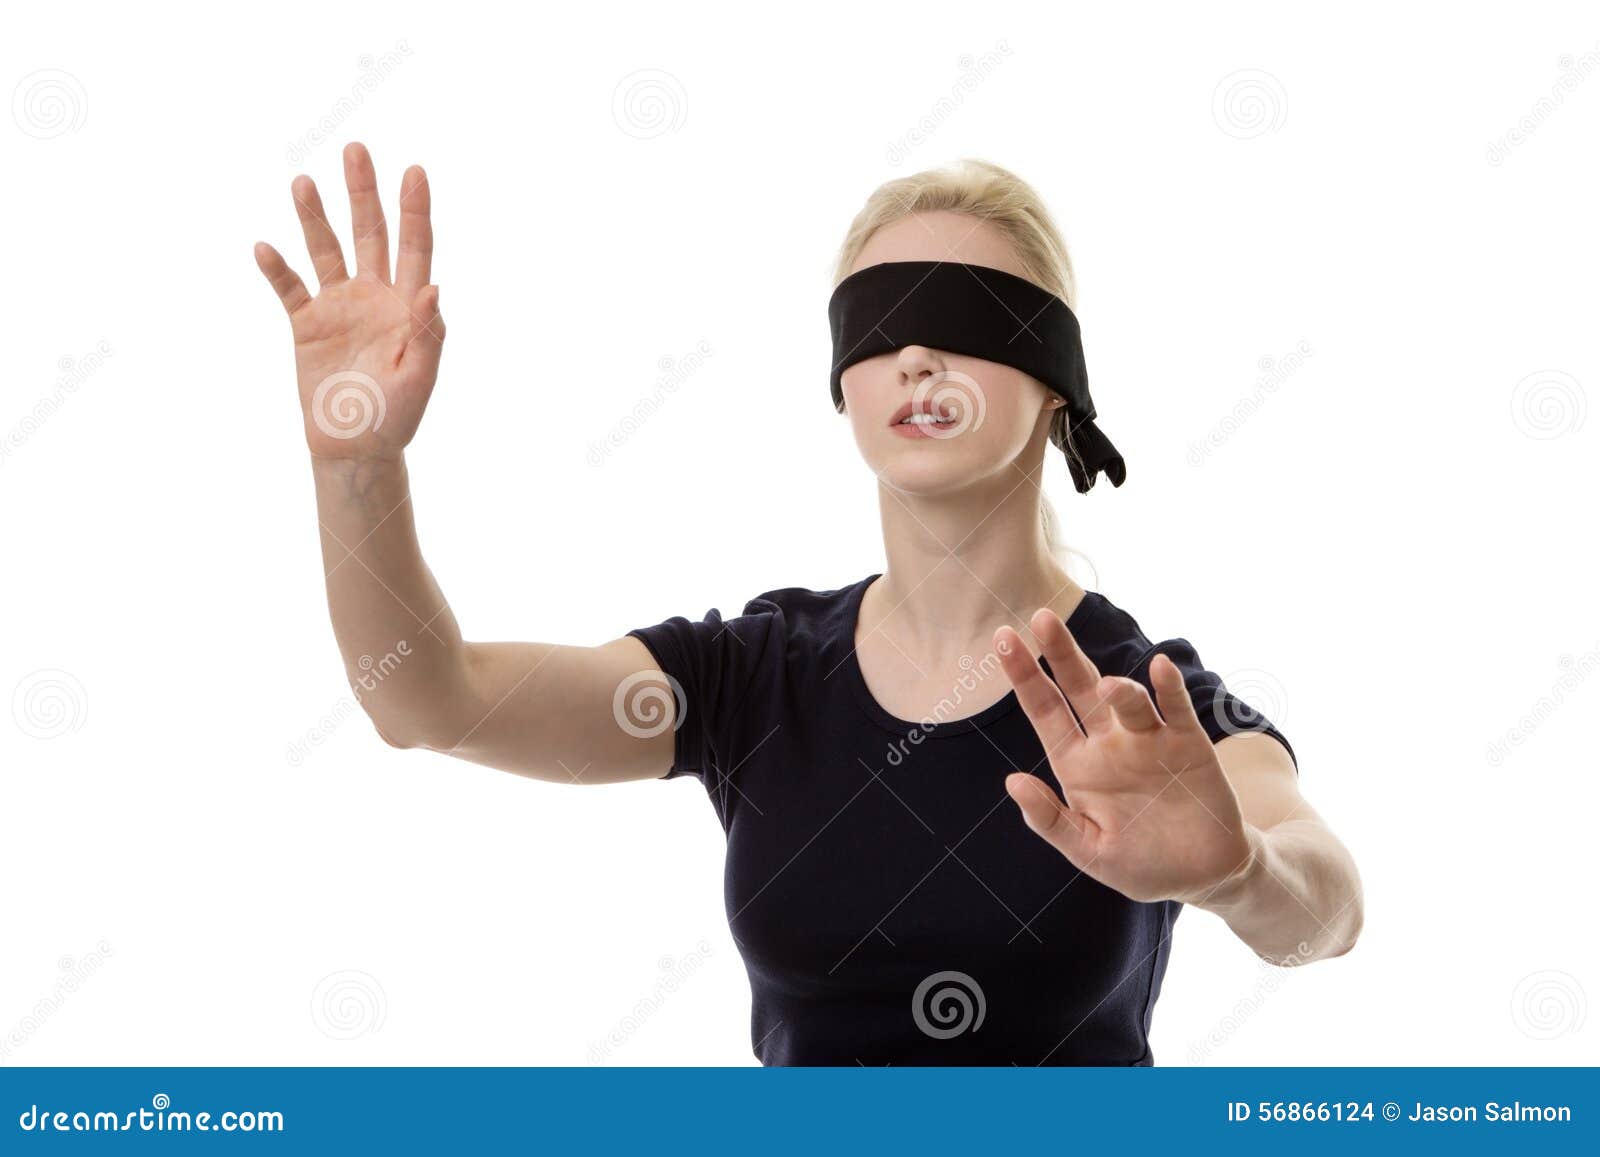 Woman in blindfold, Stock image